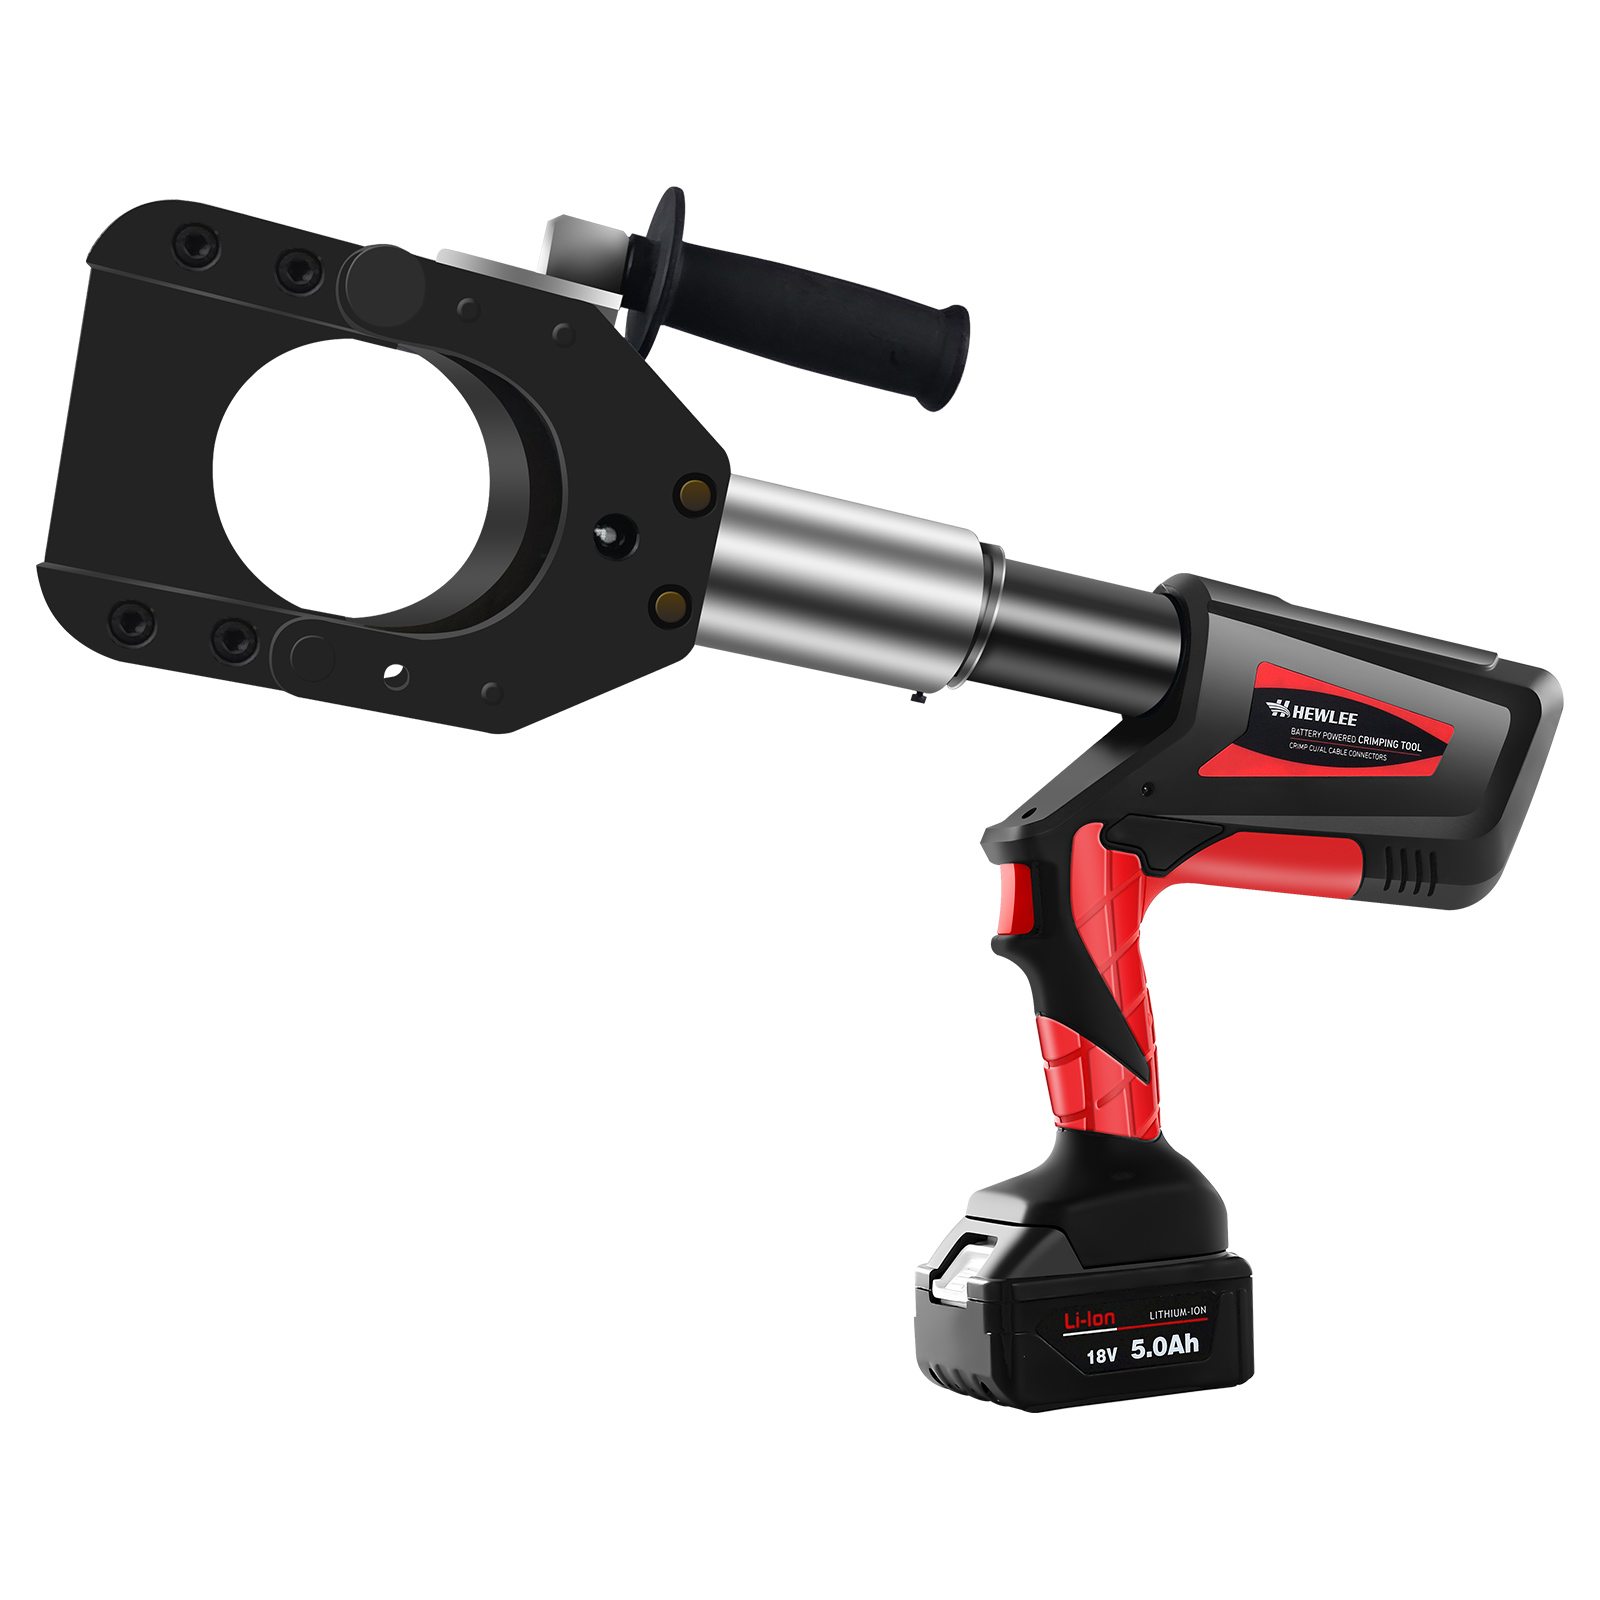 Iwiss Crimping Tool Review: Does it Work? - Bob Vila